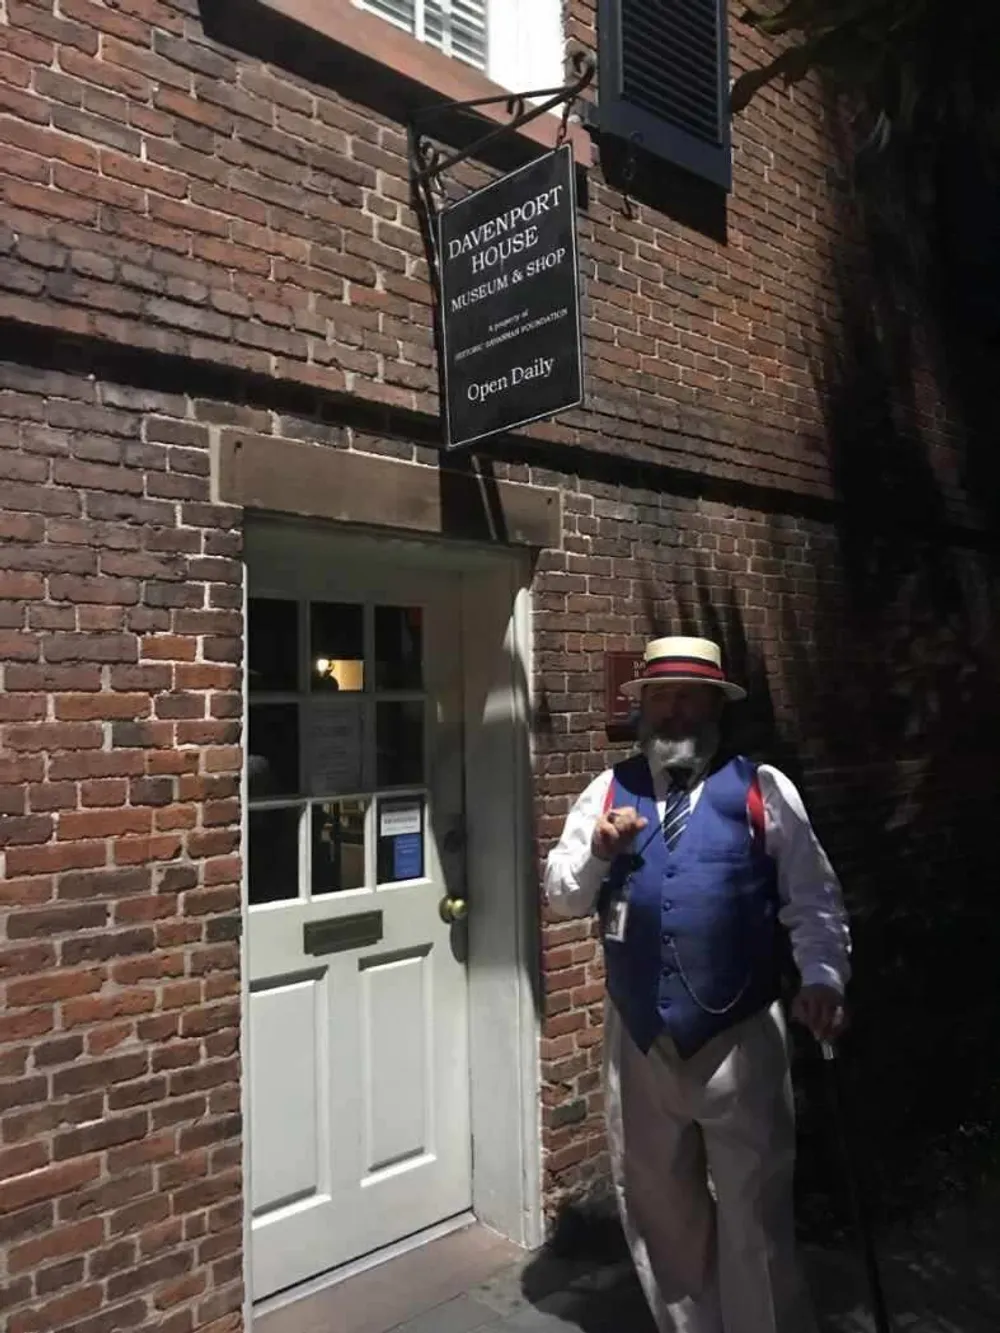 A person in historical dress stands beside the entrance to the Davenport House Museum  Shop which is signposted as open daily